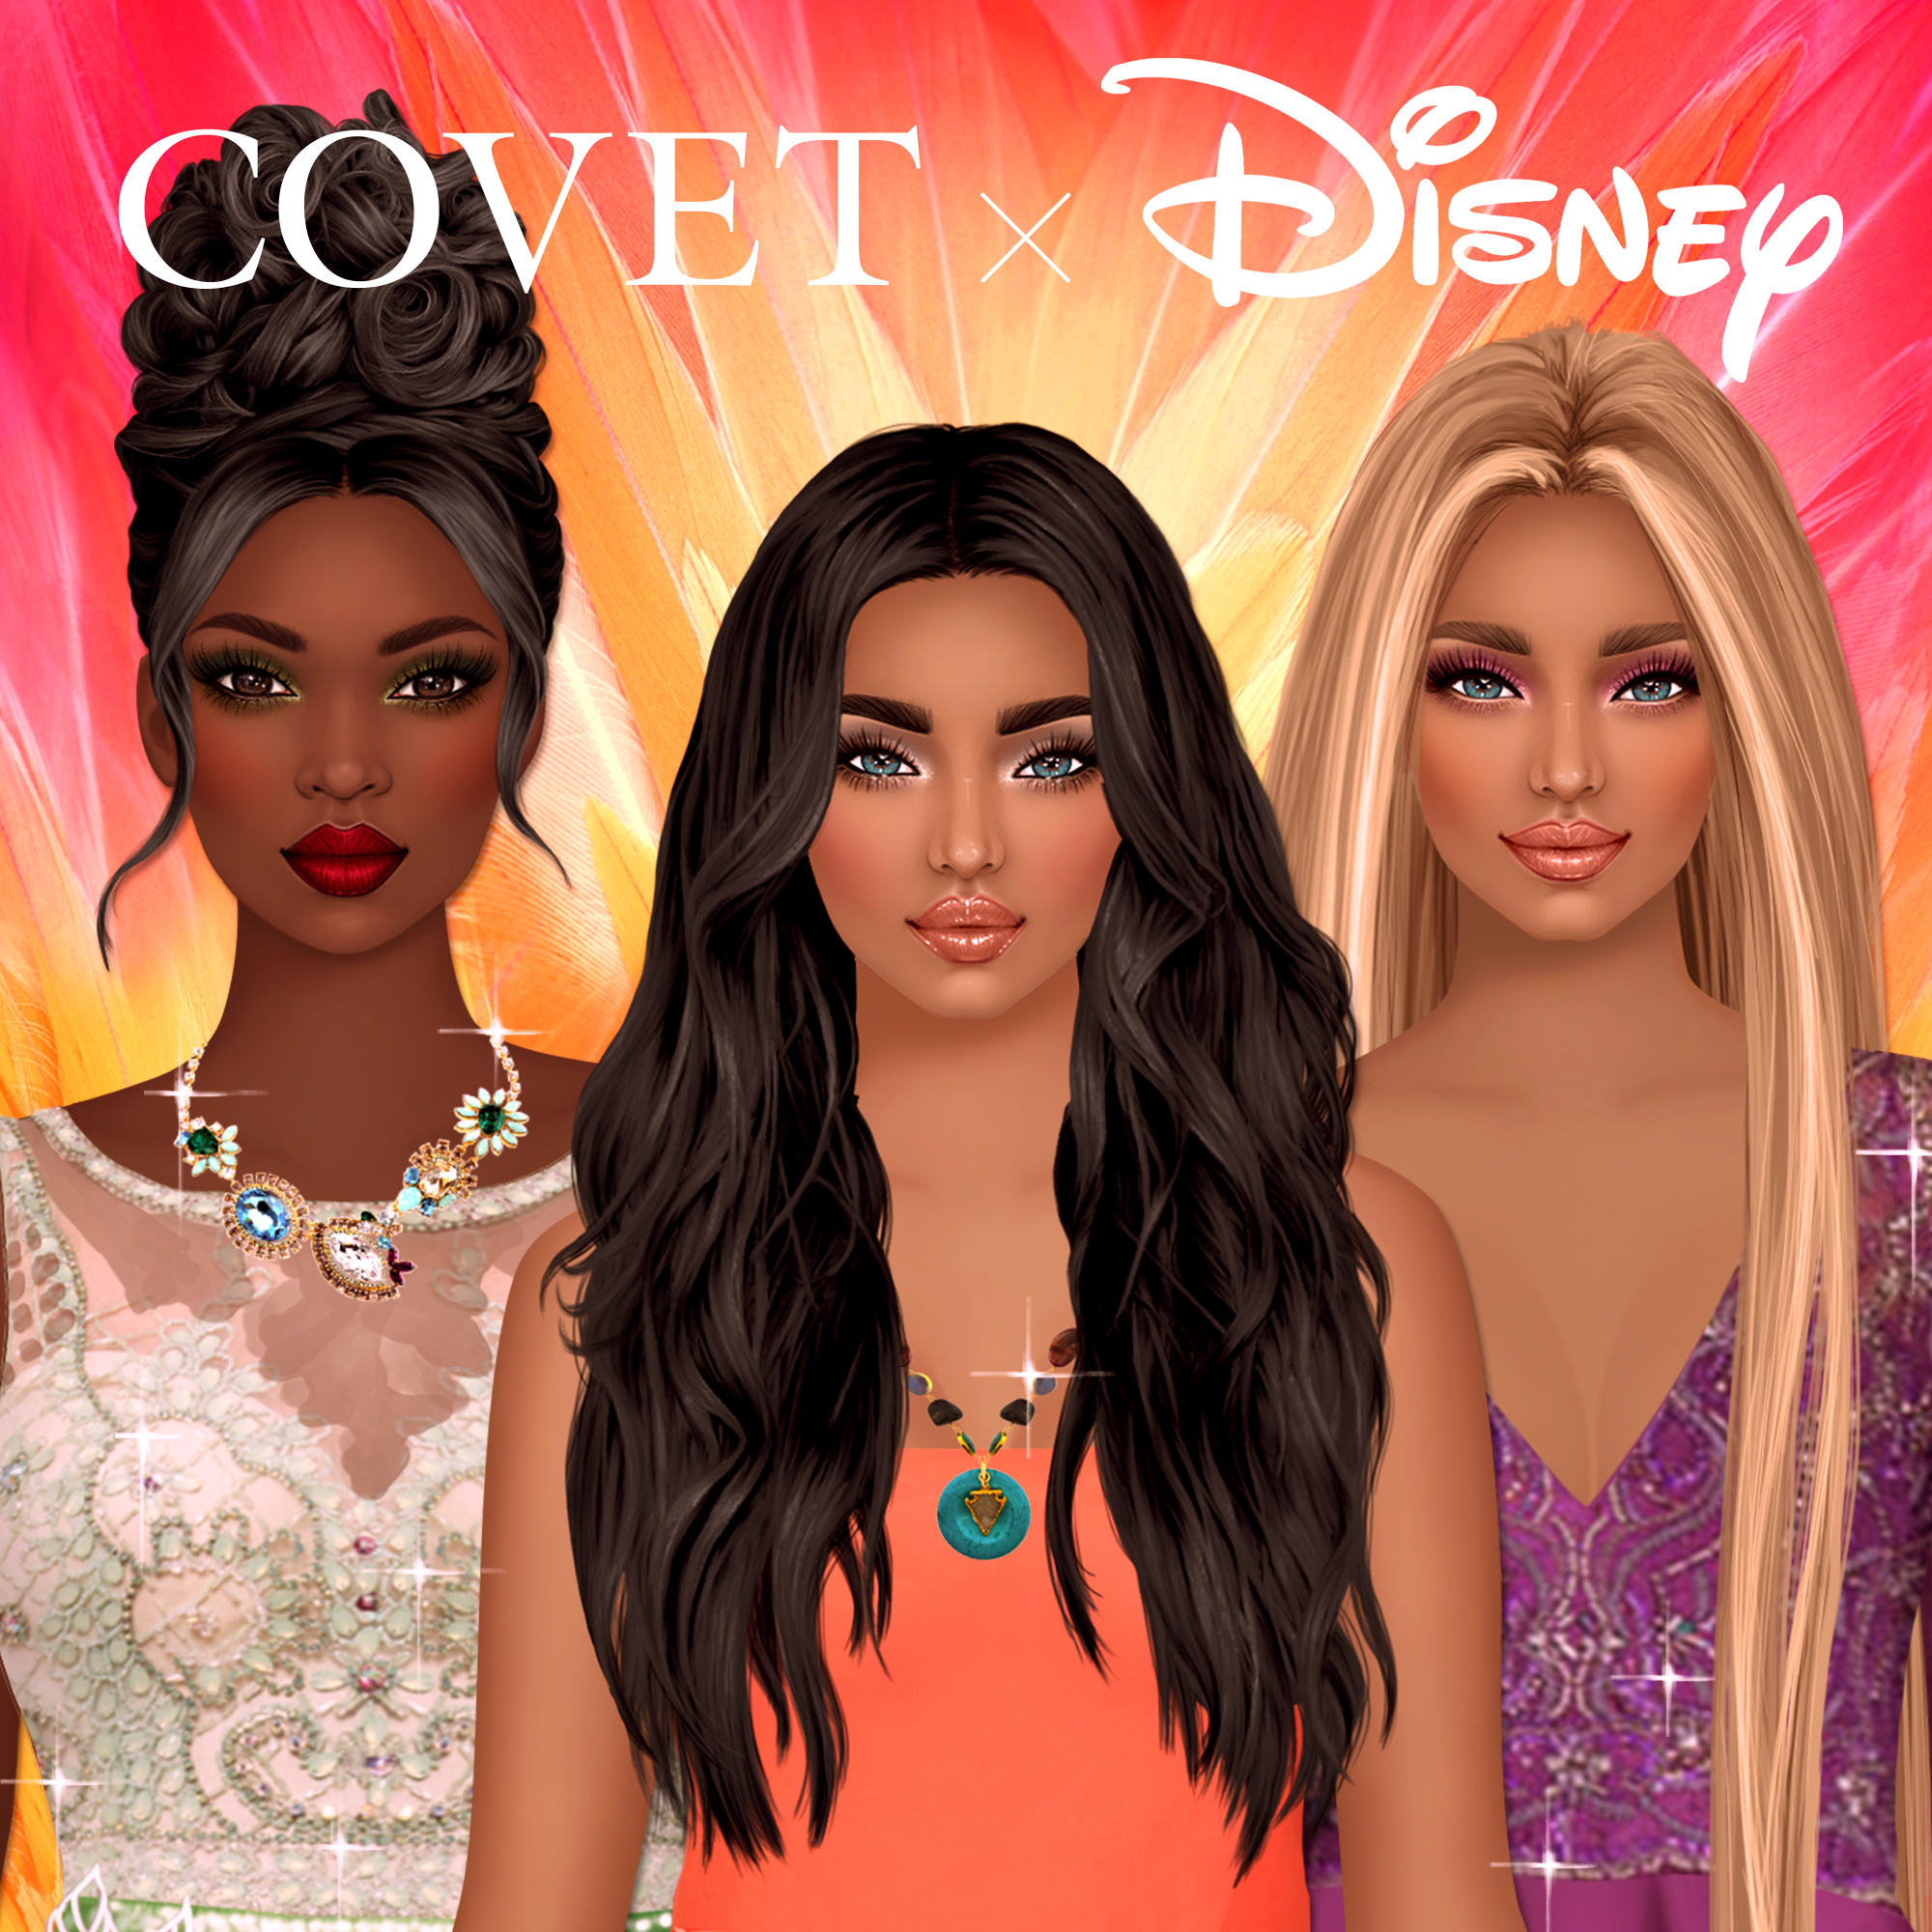 Popular Covet Fashion App is Featuring a Disney Style Challenge.